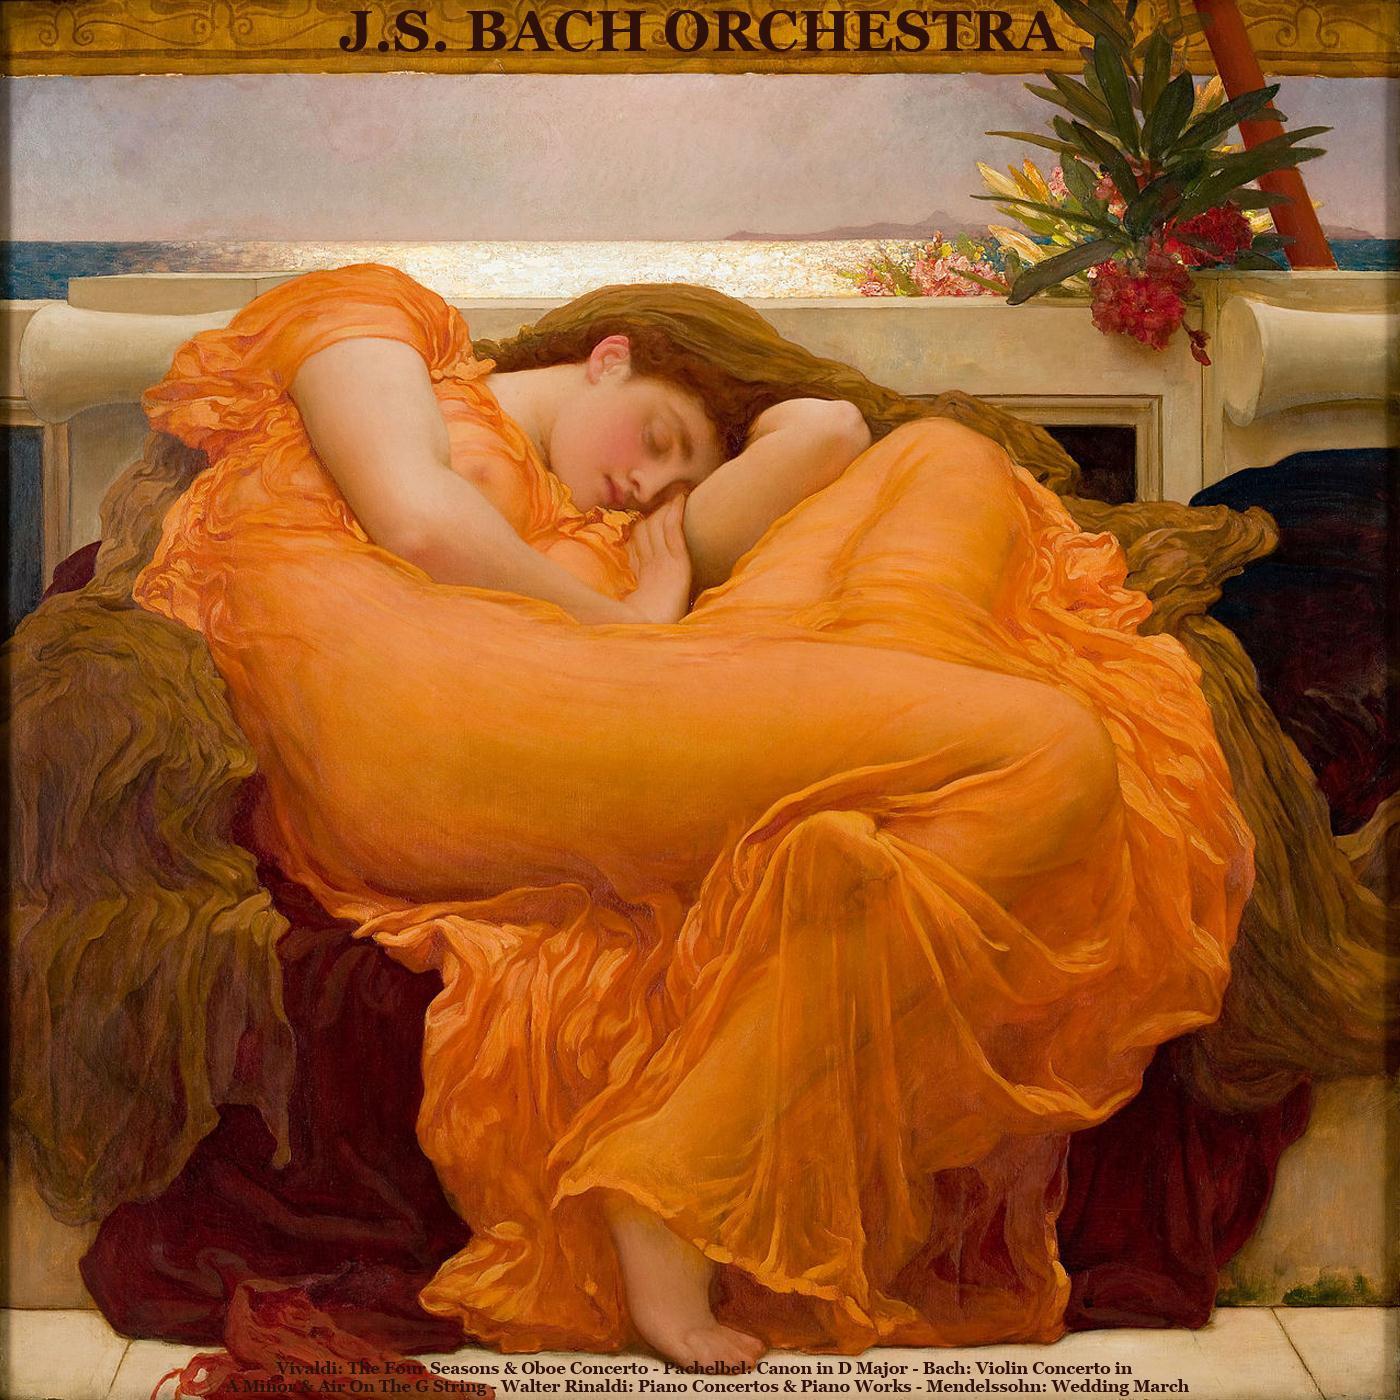 J.S. Bach Orchestra - The Four Seasons, Concerto for Violin, Strings and Continuo in F Major, No. 3, Op. 8, Rv 293, “l’ Autunno” (Autumn): III. Allegro